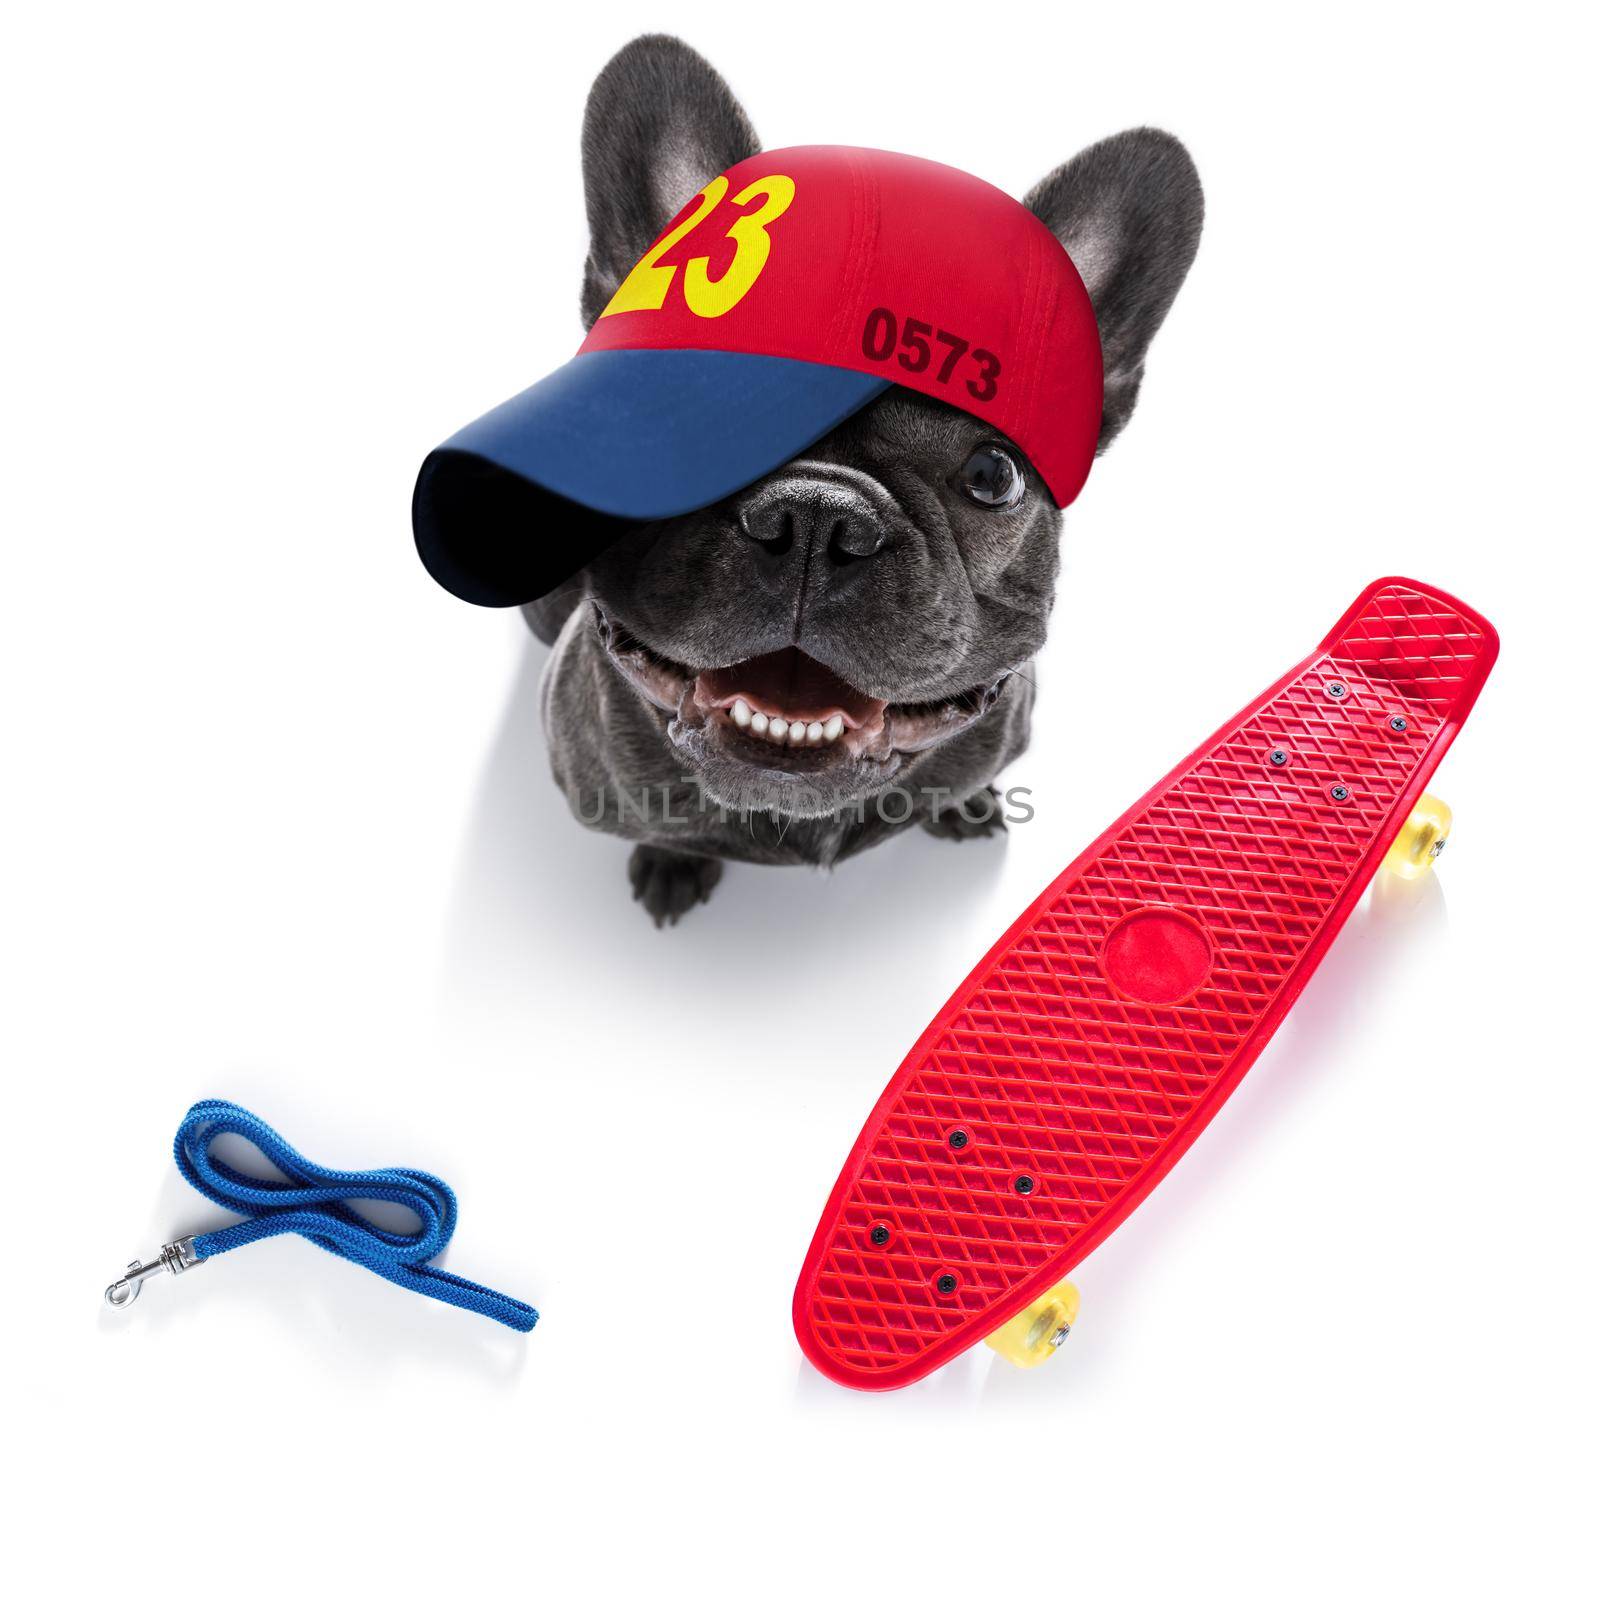 cool casual look french bulldog dog wearing a baseball cap or hat , sporty and fit , isolated on white background on a skateboard, ready for a walk with leash